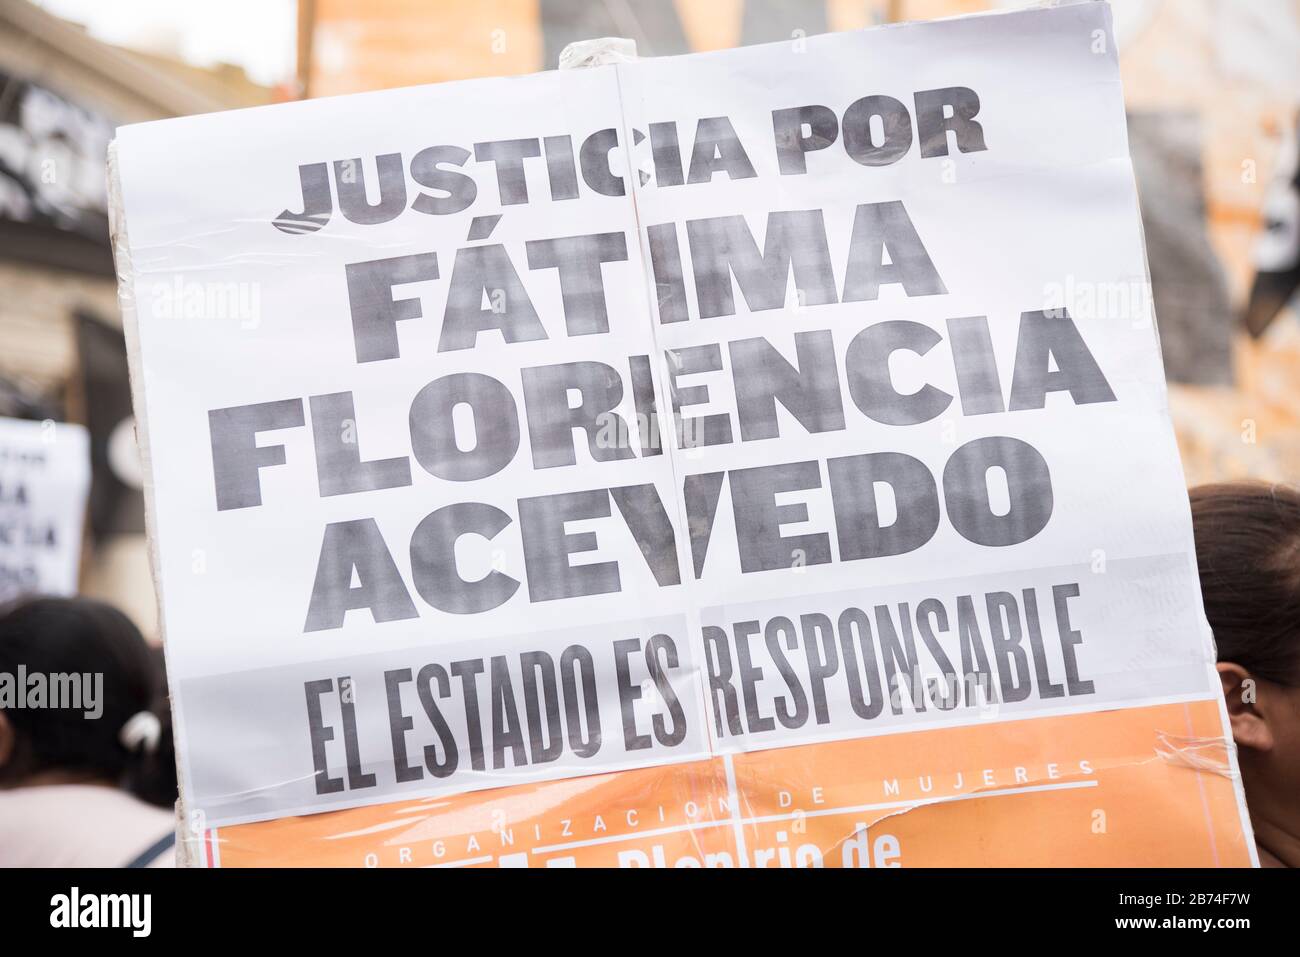 CABA, Buenos Aires / Argentina; March 9, 2020: women's day. Poster asking for justice for Fatima Florencia Acevedo, killed by her ex-partner Stock Photo